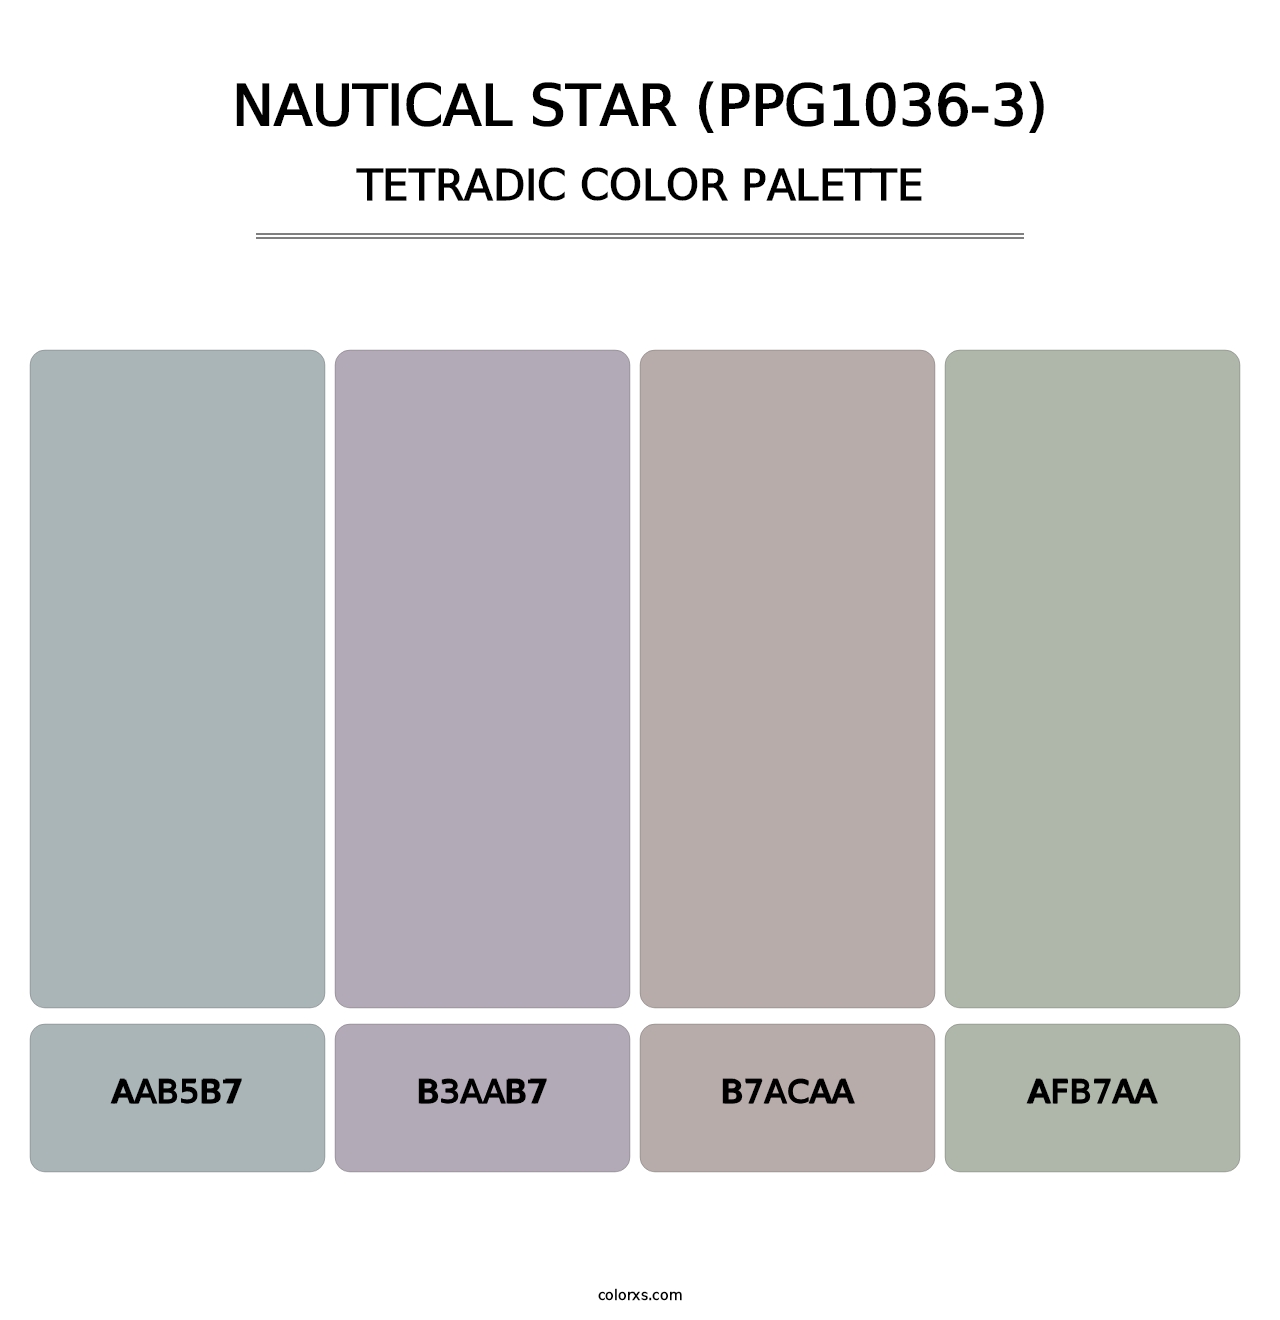 Nautical Star (PPG1036-3) - Tetradic Color Palette